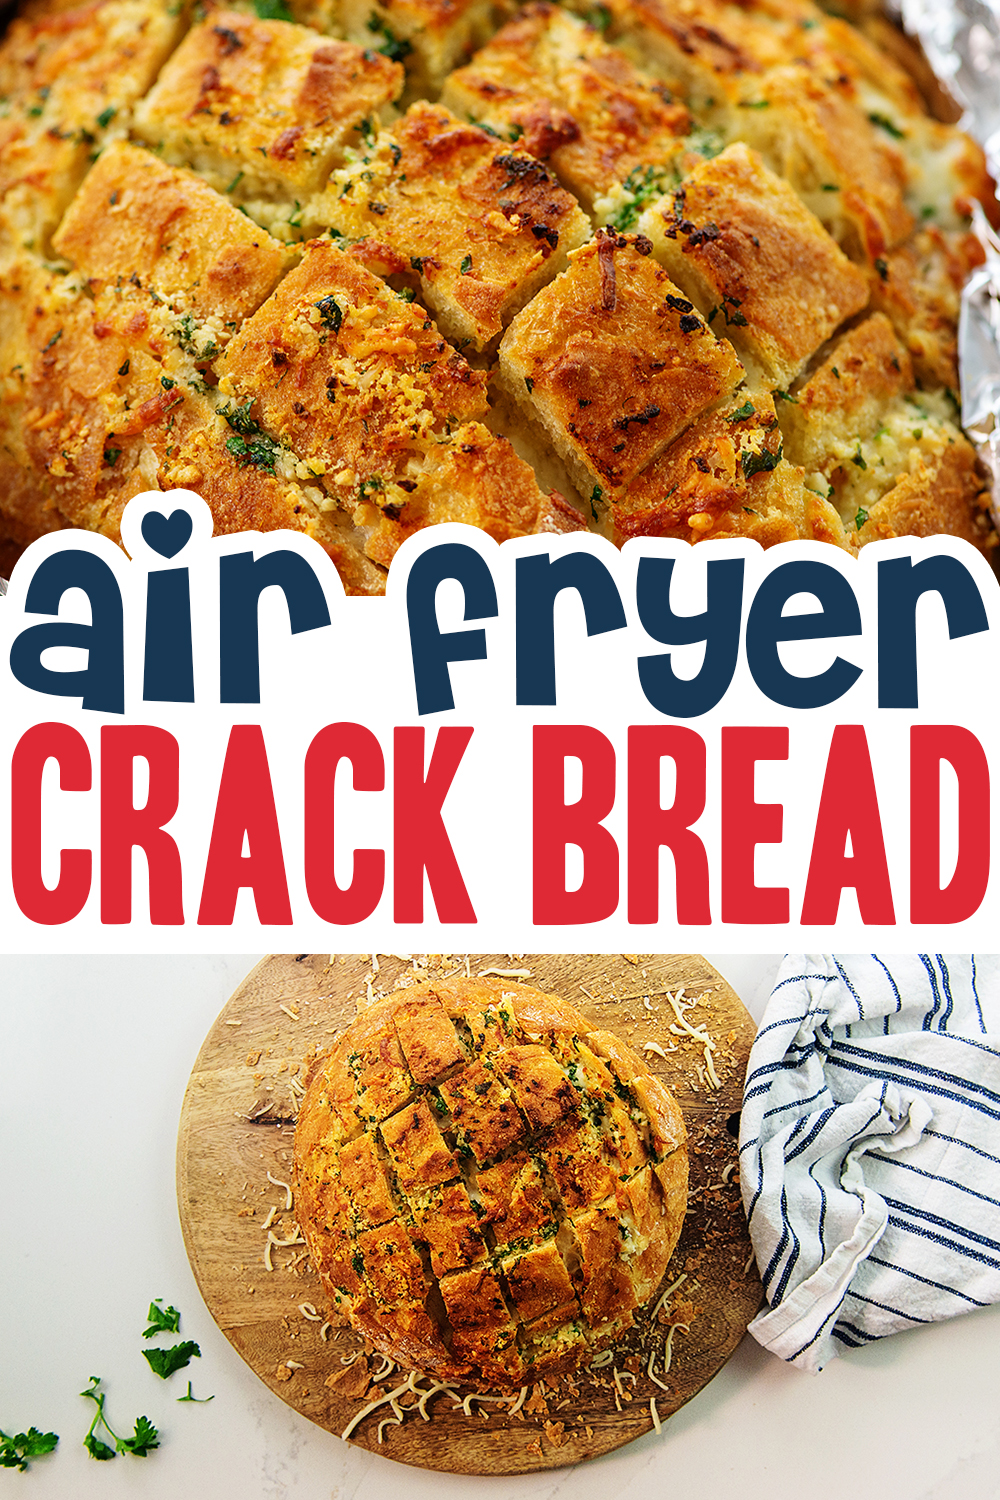 This air fryer crack bread is loaded with cheese and garlic, making it the perfect appetizer or snack!